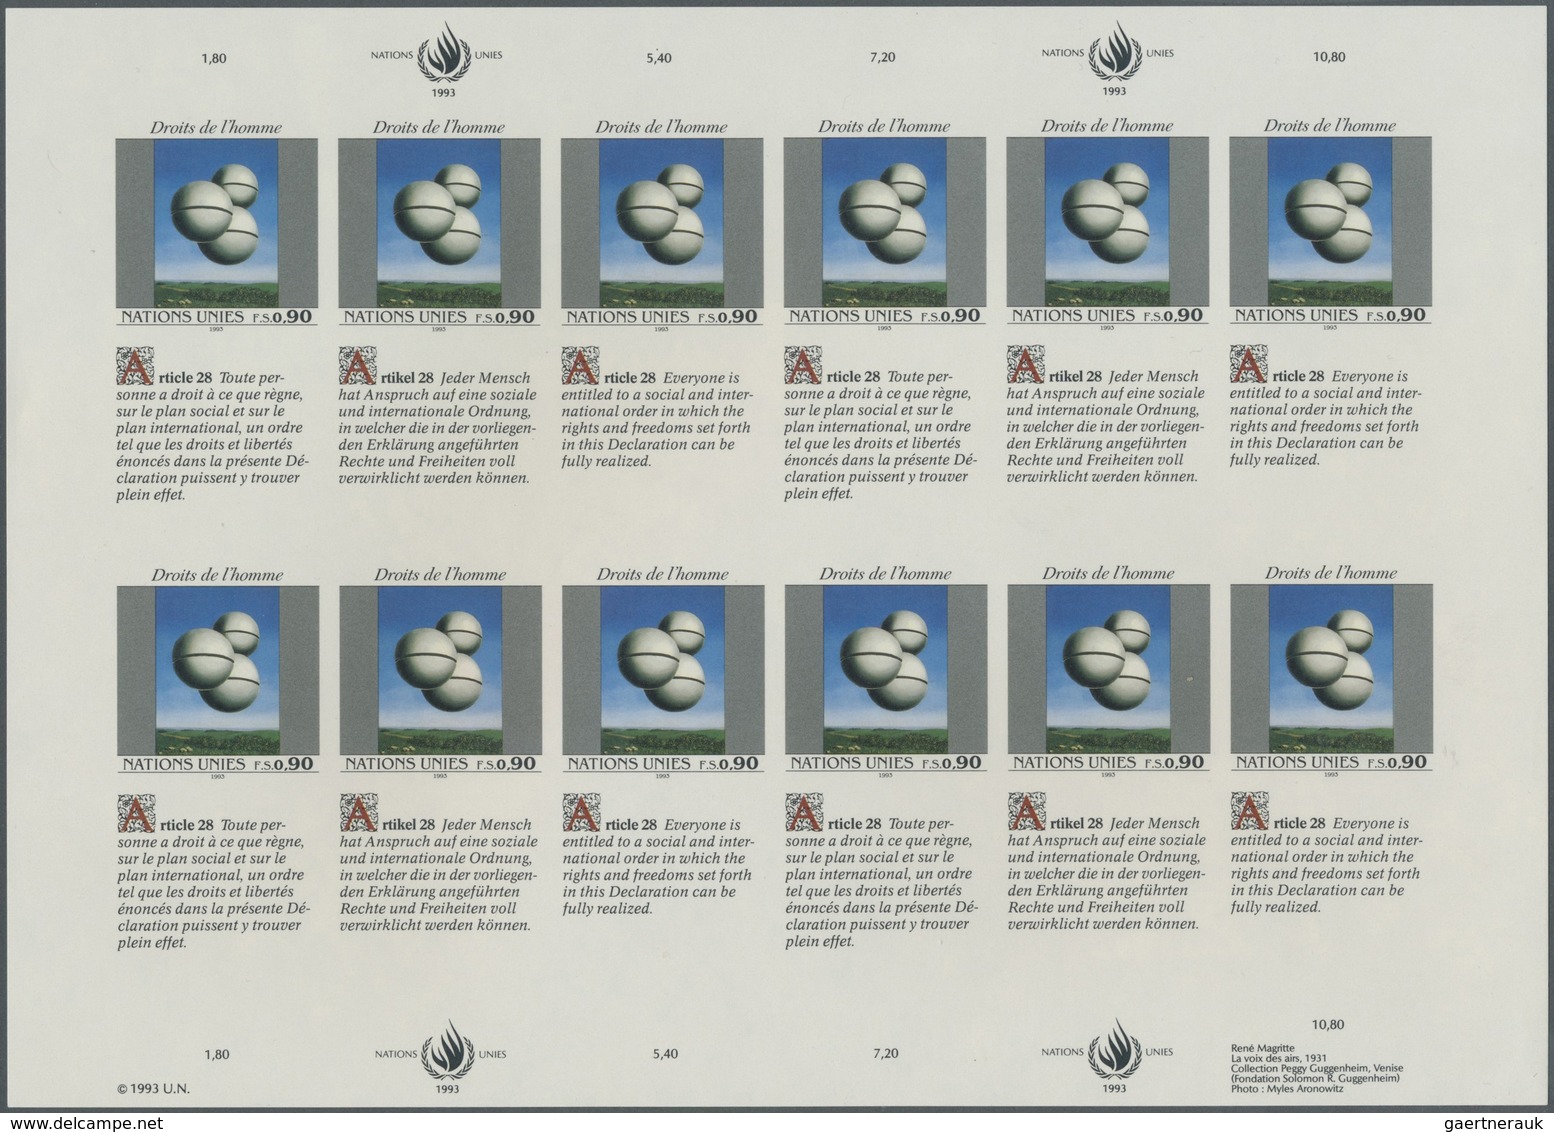 ** Vereinte Nationen - Genf: 1993. Imperforate Pane Of 12 + 12 Se-tenant Labels For The 90c Value Of Th - Unused Stamps